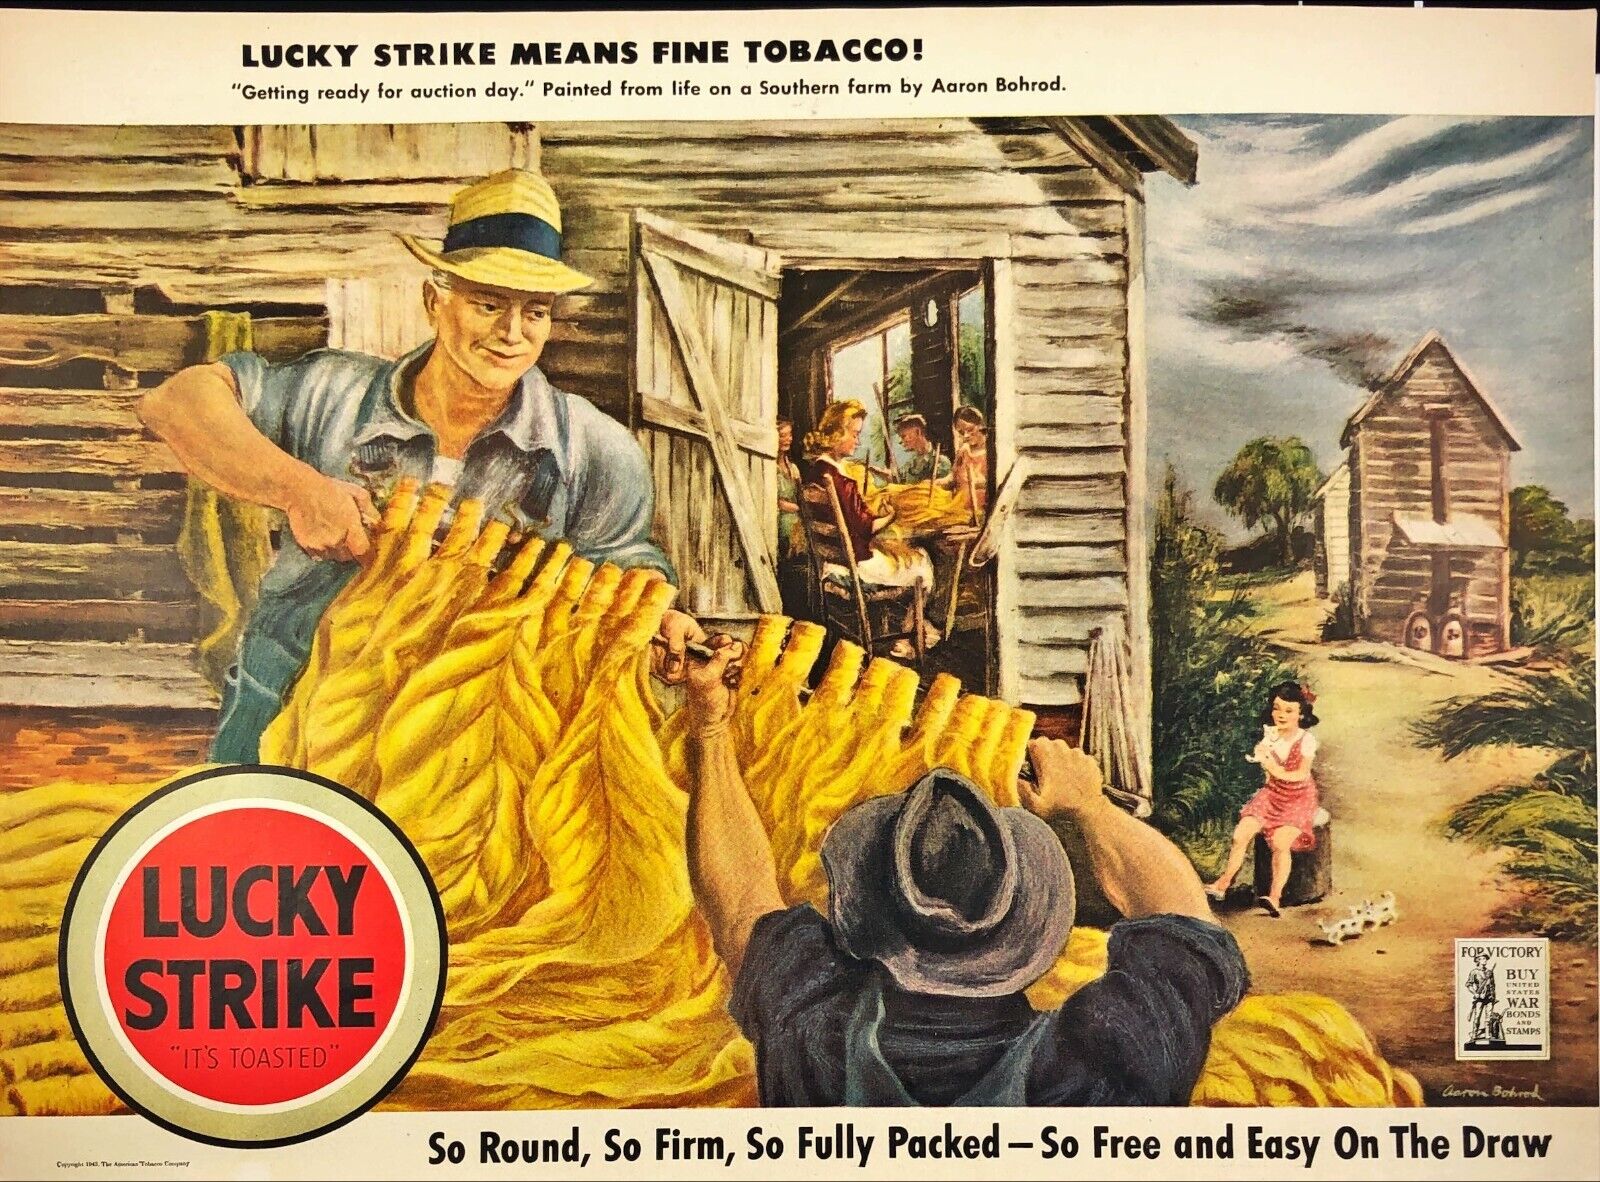 1943 Lucky Strike Cigarettes Farmer Getting Ready For Auction Day WWII Print Ad